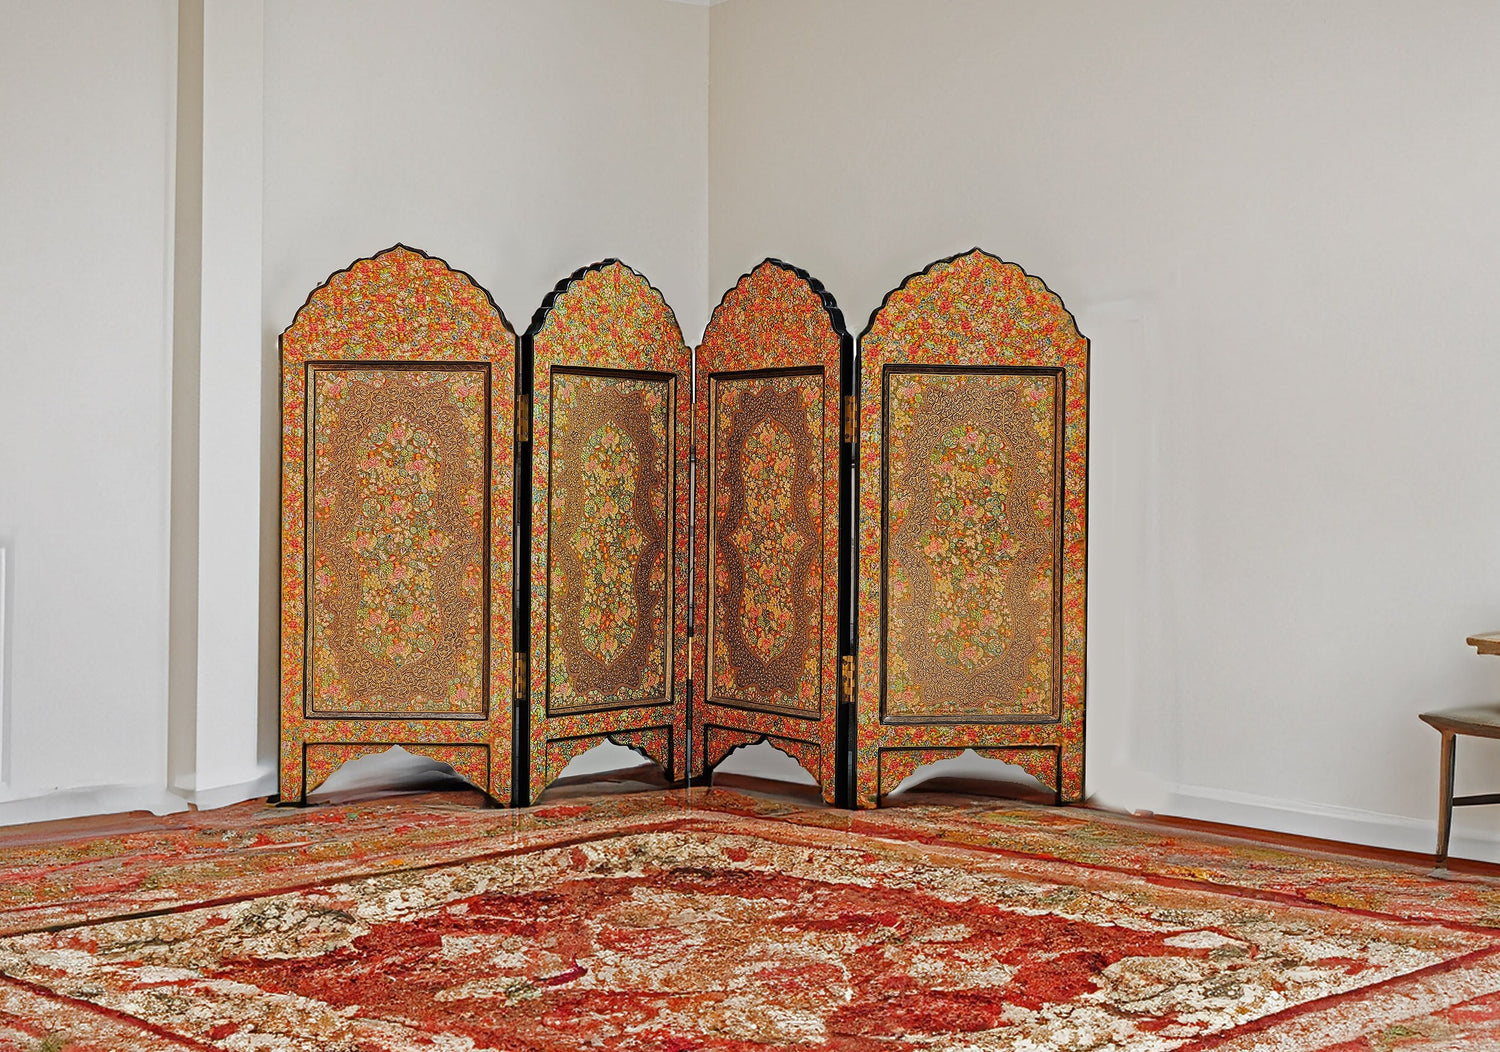 Kashmiri Wall Art Room Divider with fine Hazara floral paintings in a very unique decor style